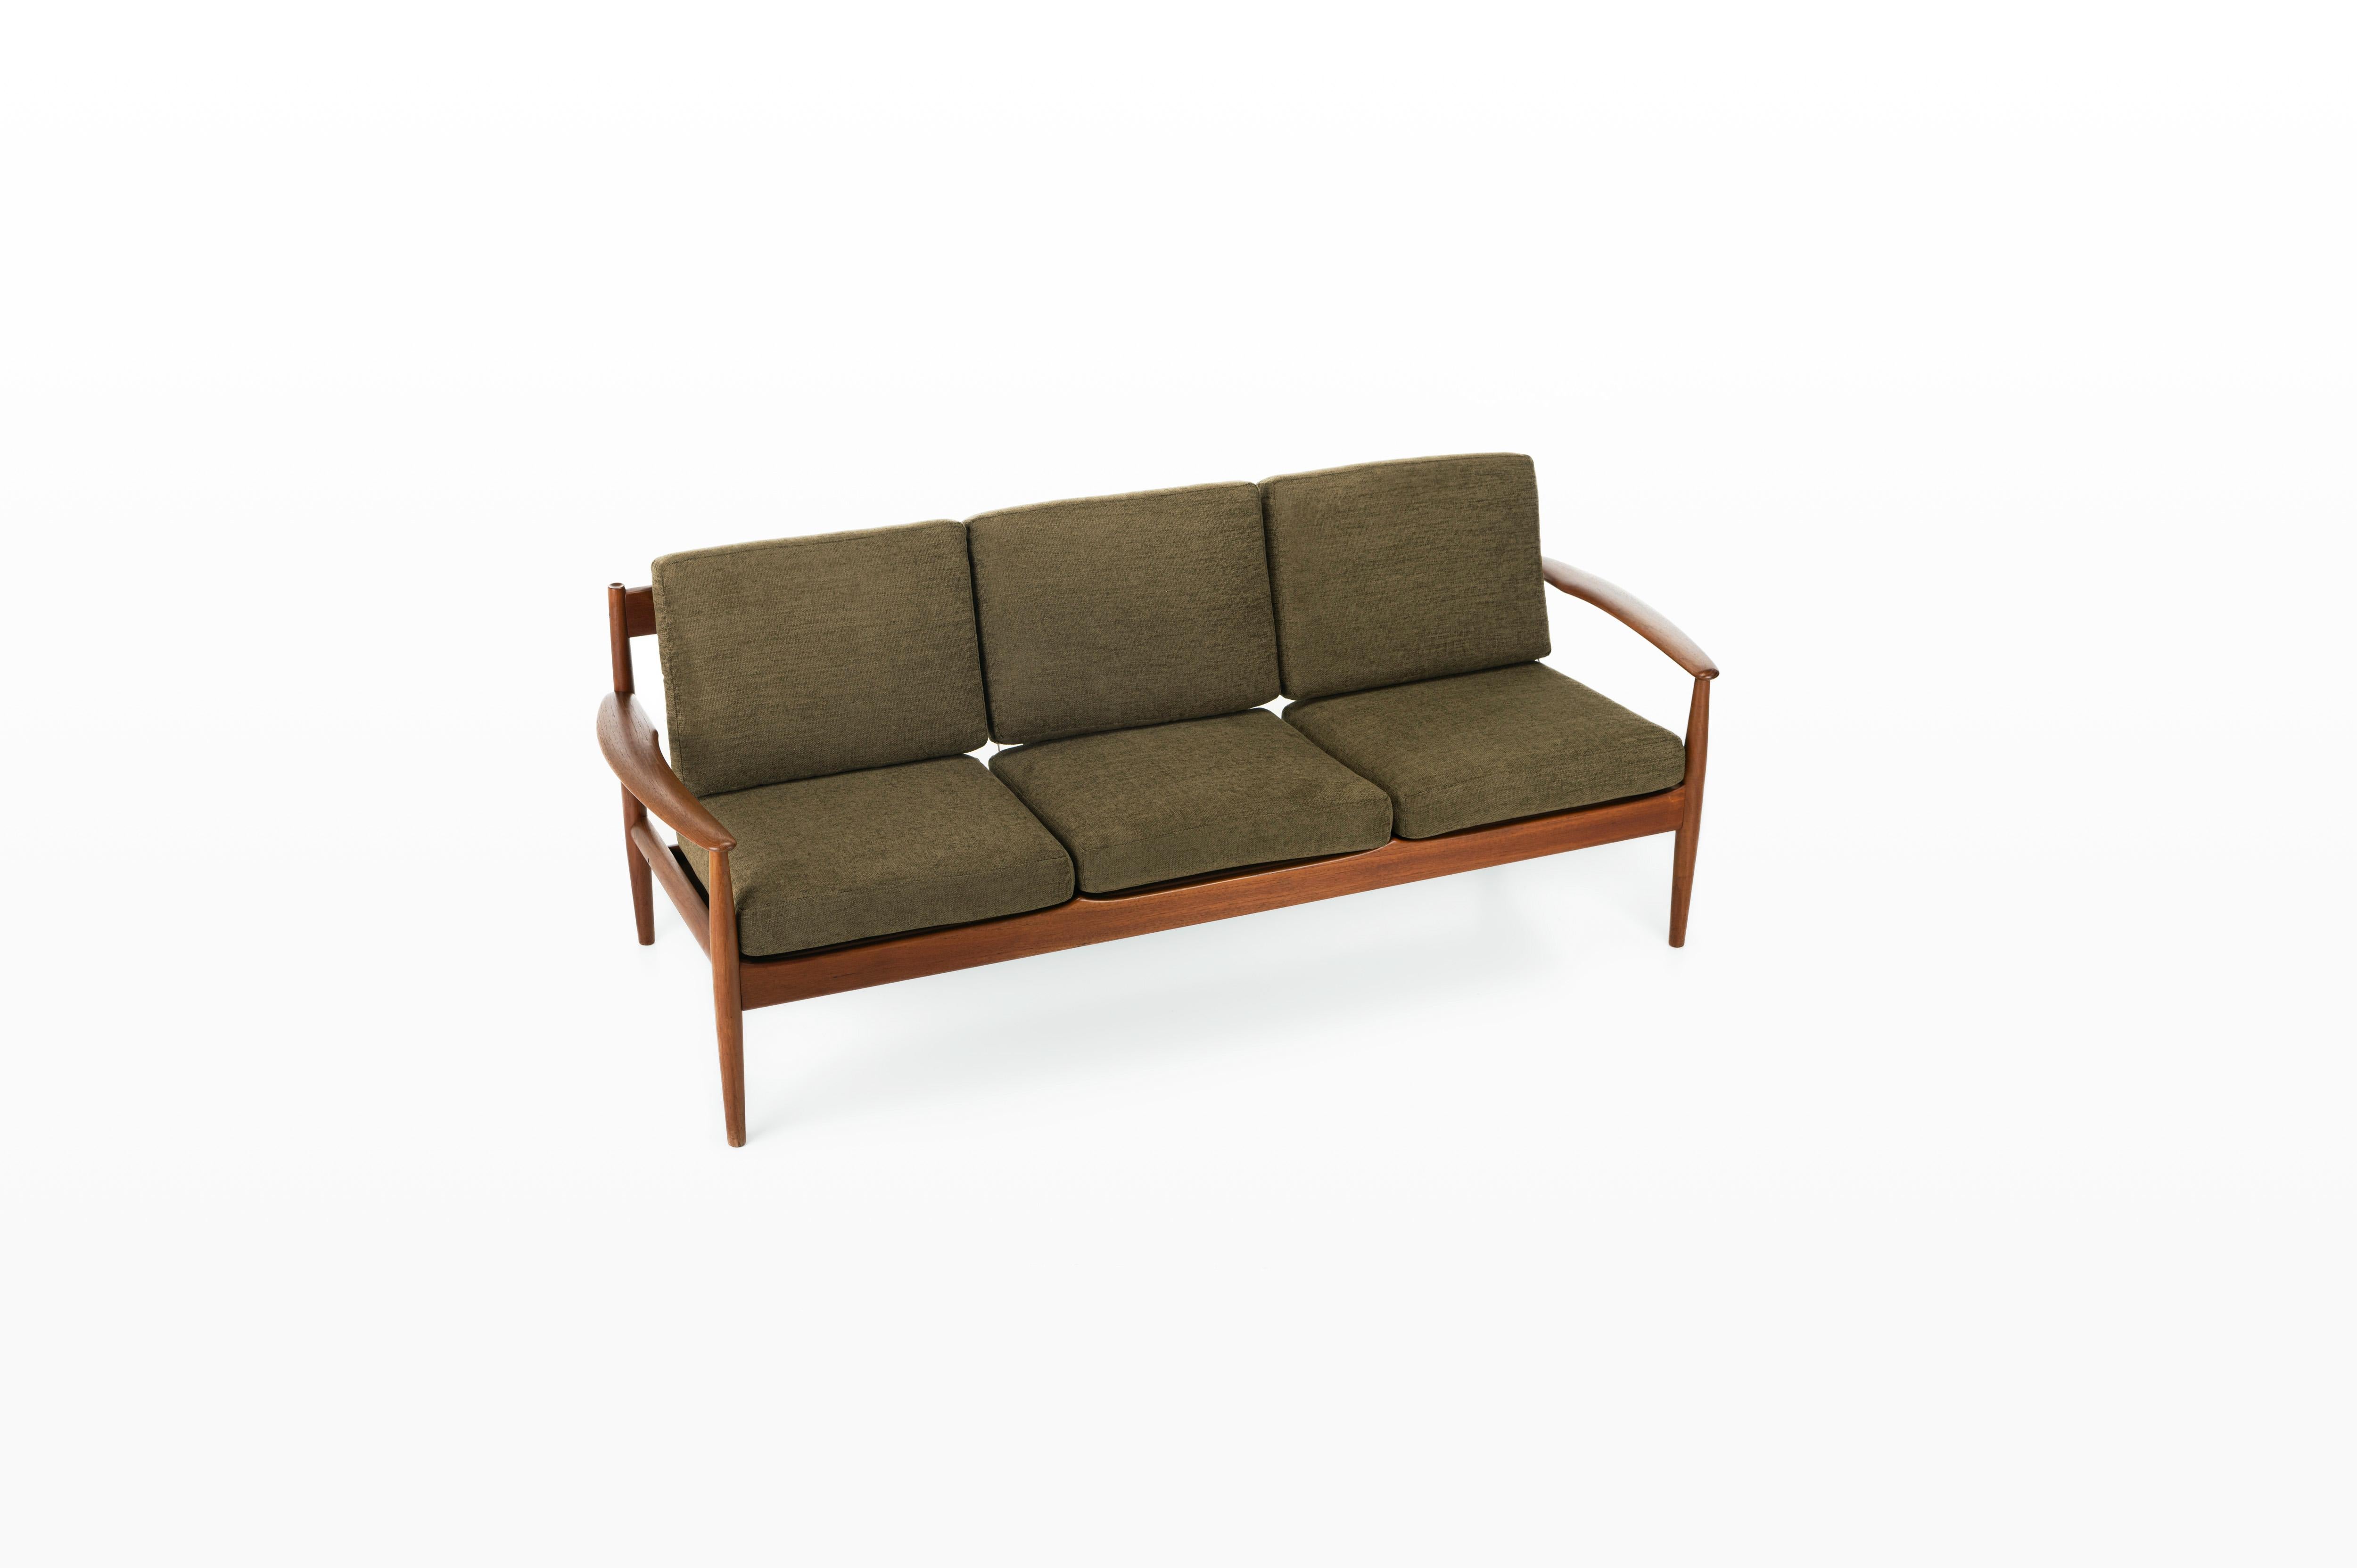 Sofa in teak designed by Grete Jalk for France & Daverkosen in 1962. This sofa is reupholstered with a khaki green fabric and is marked by the producer.